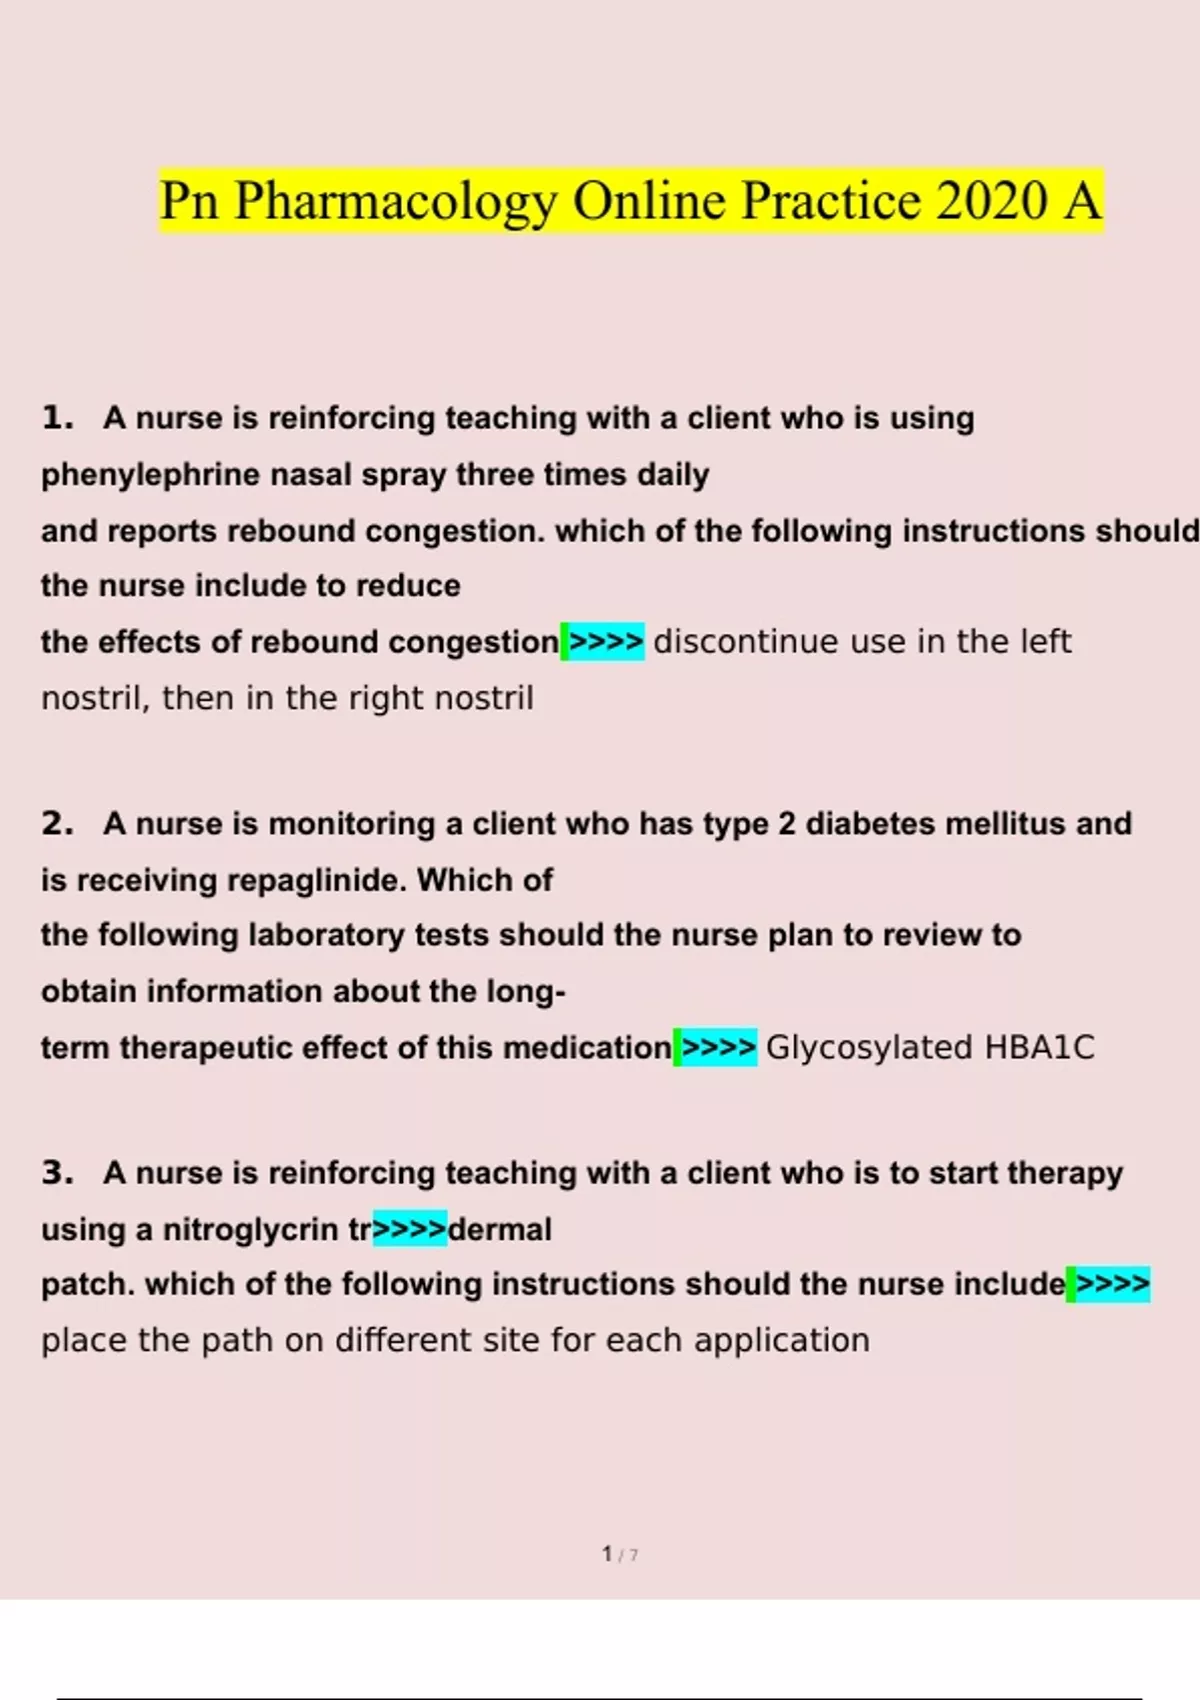 pn pharmacology online practice 2020 A Questions 2023 2024 With